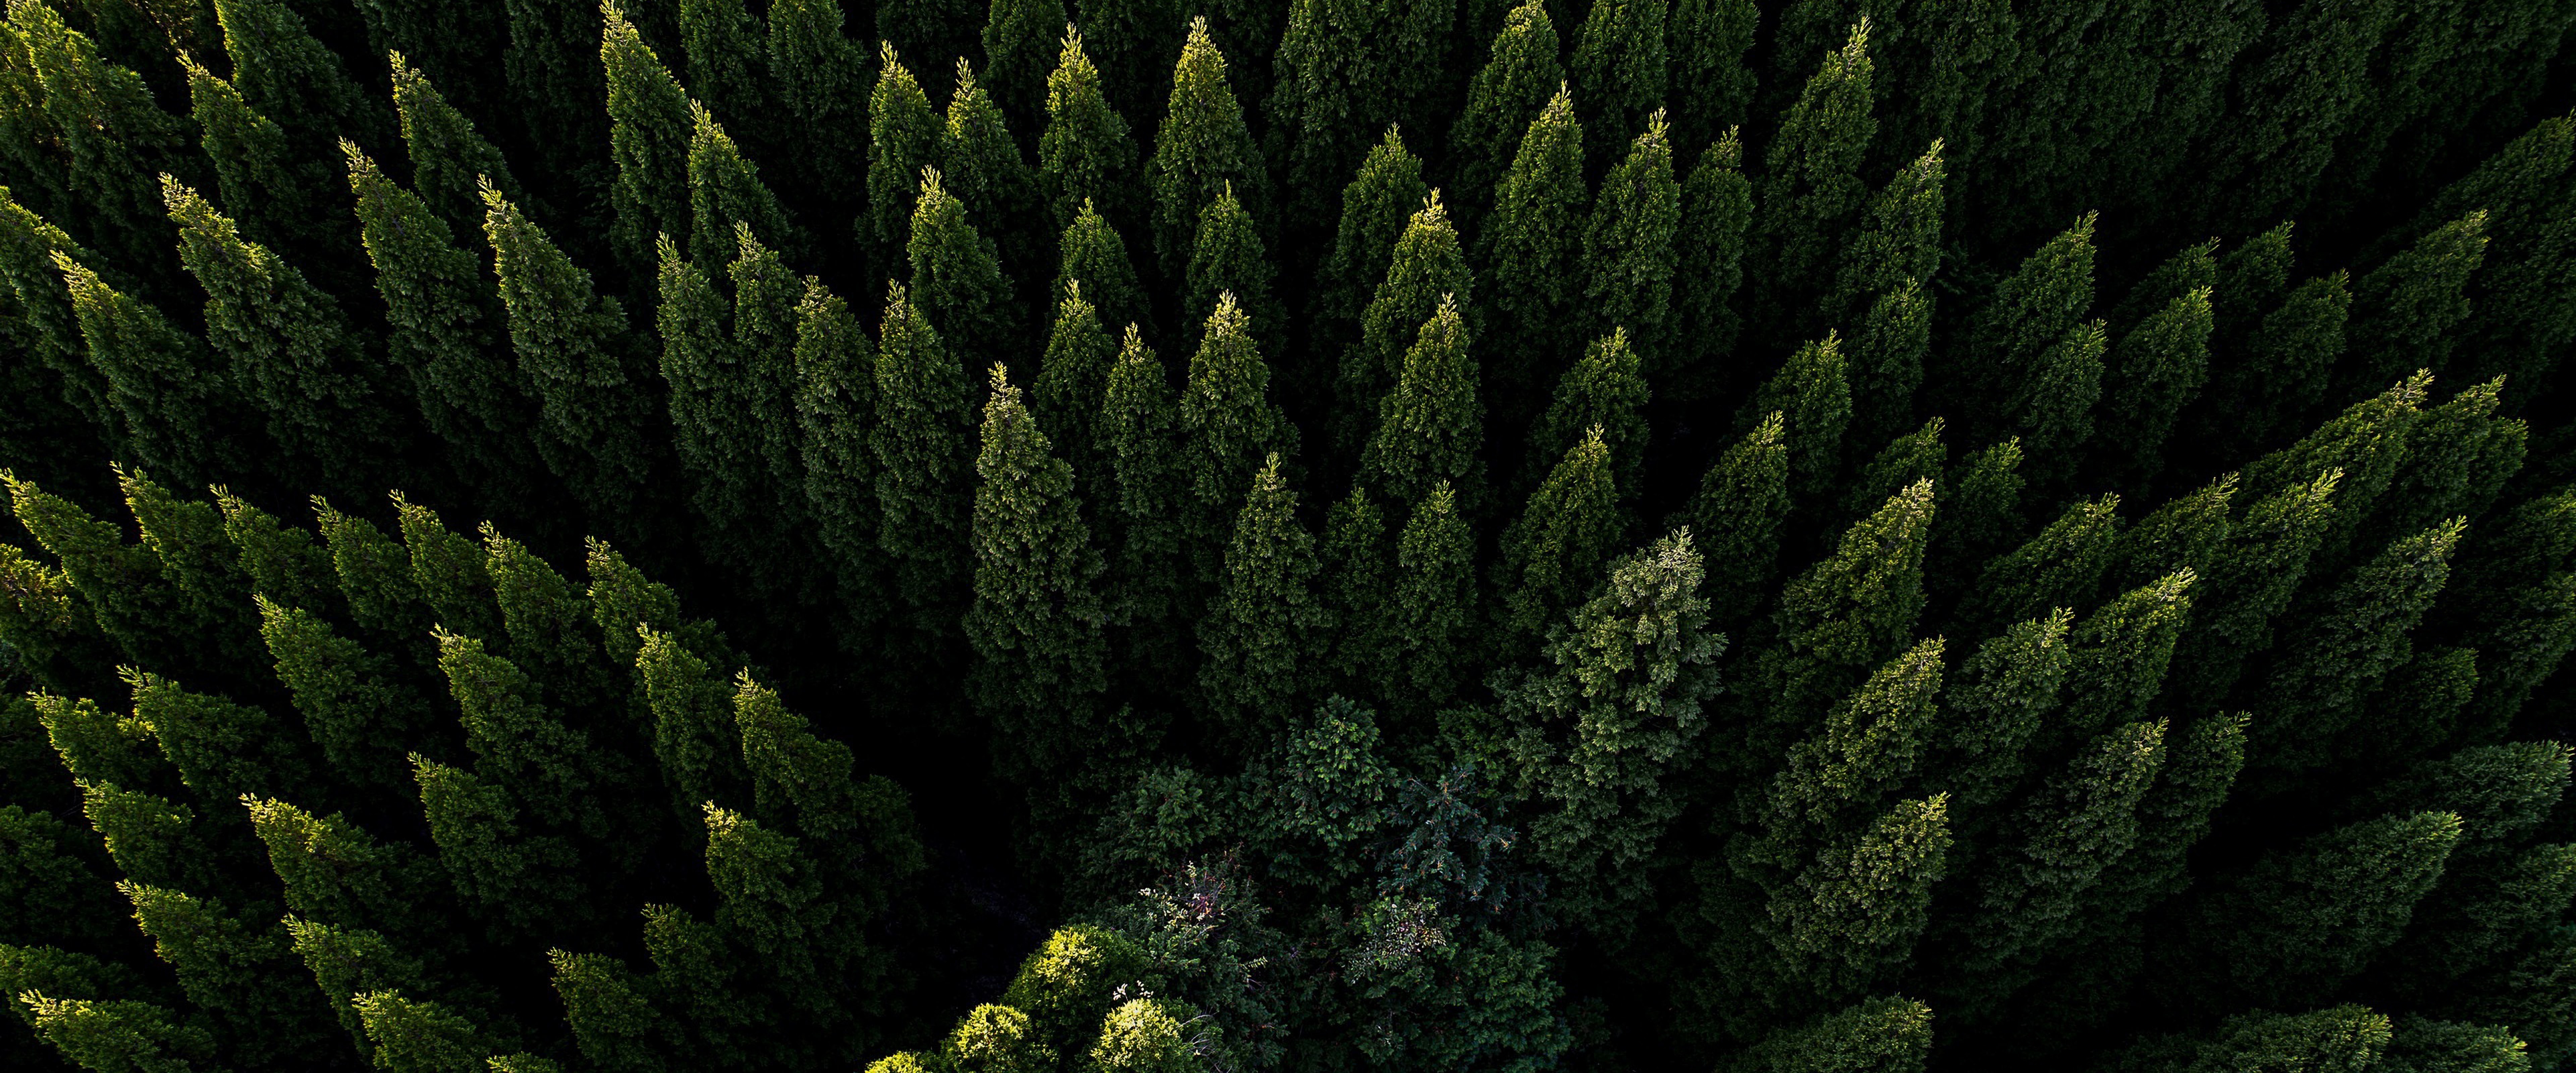 Forest Nature Aerial View Scenery 4K Wallpaper 106